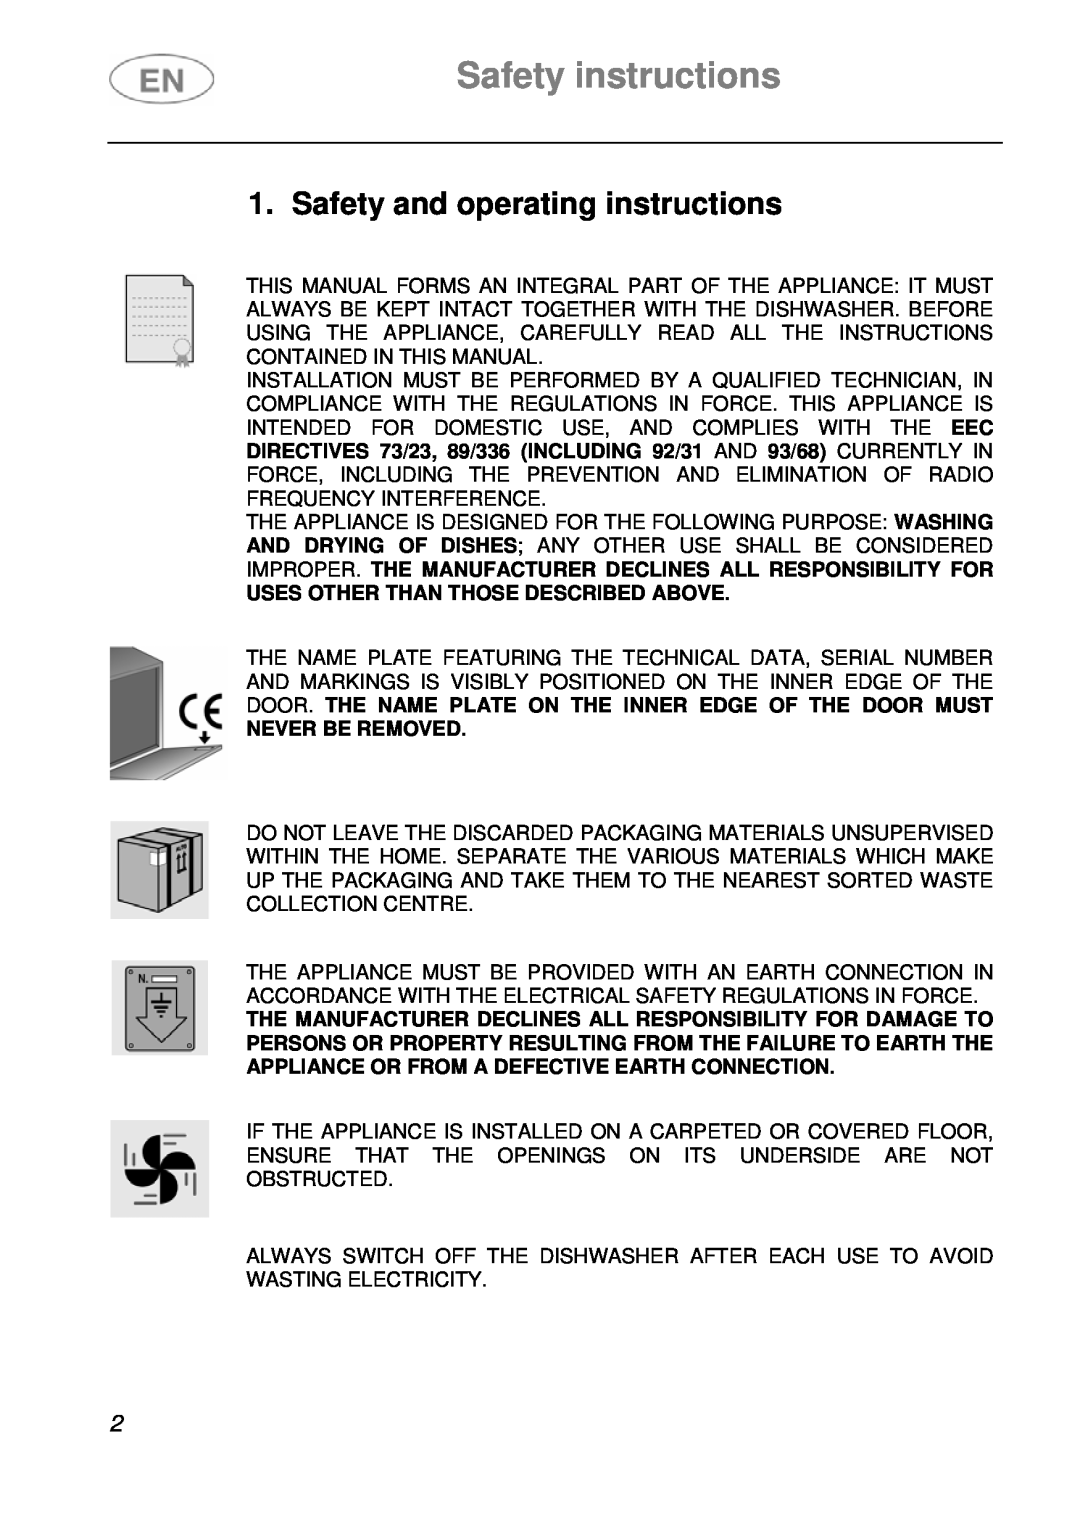 Smeg LVF649B Safety instructions, Safety and operating instructions, Uses Other Than Those Described Above 